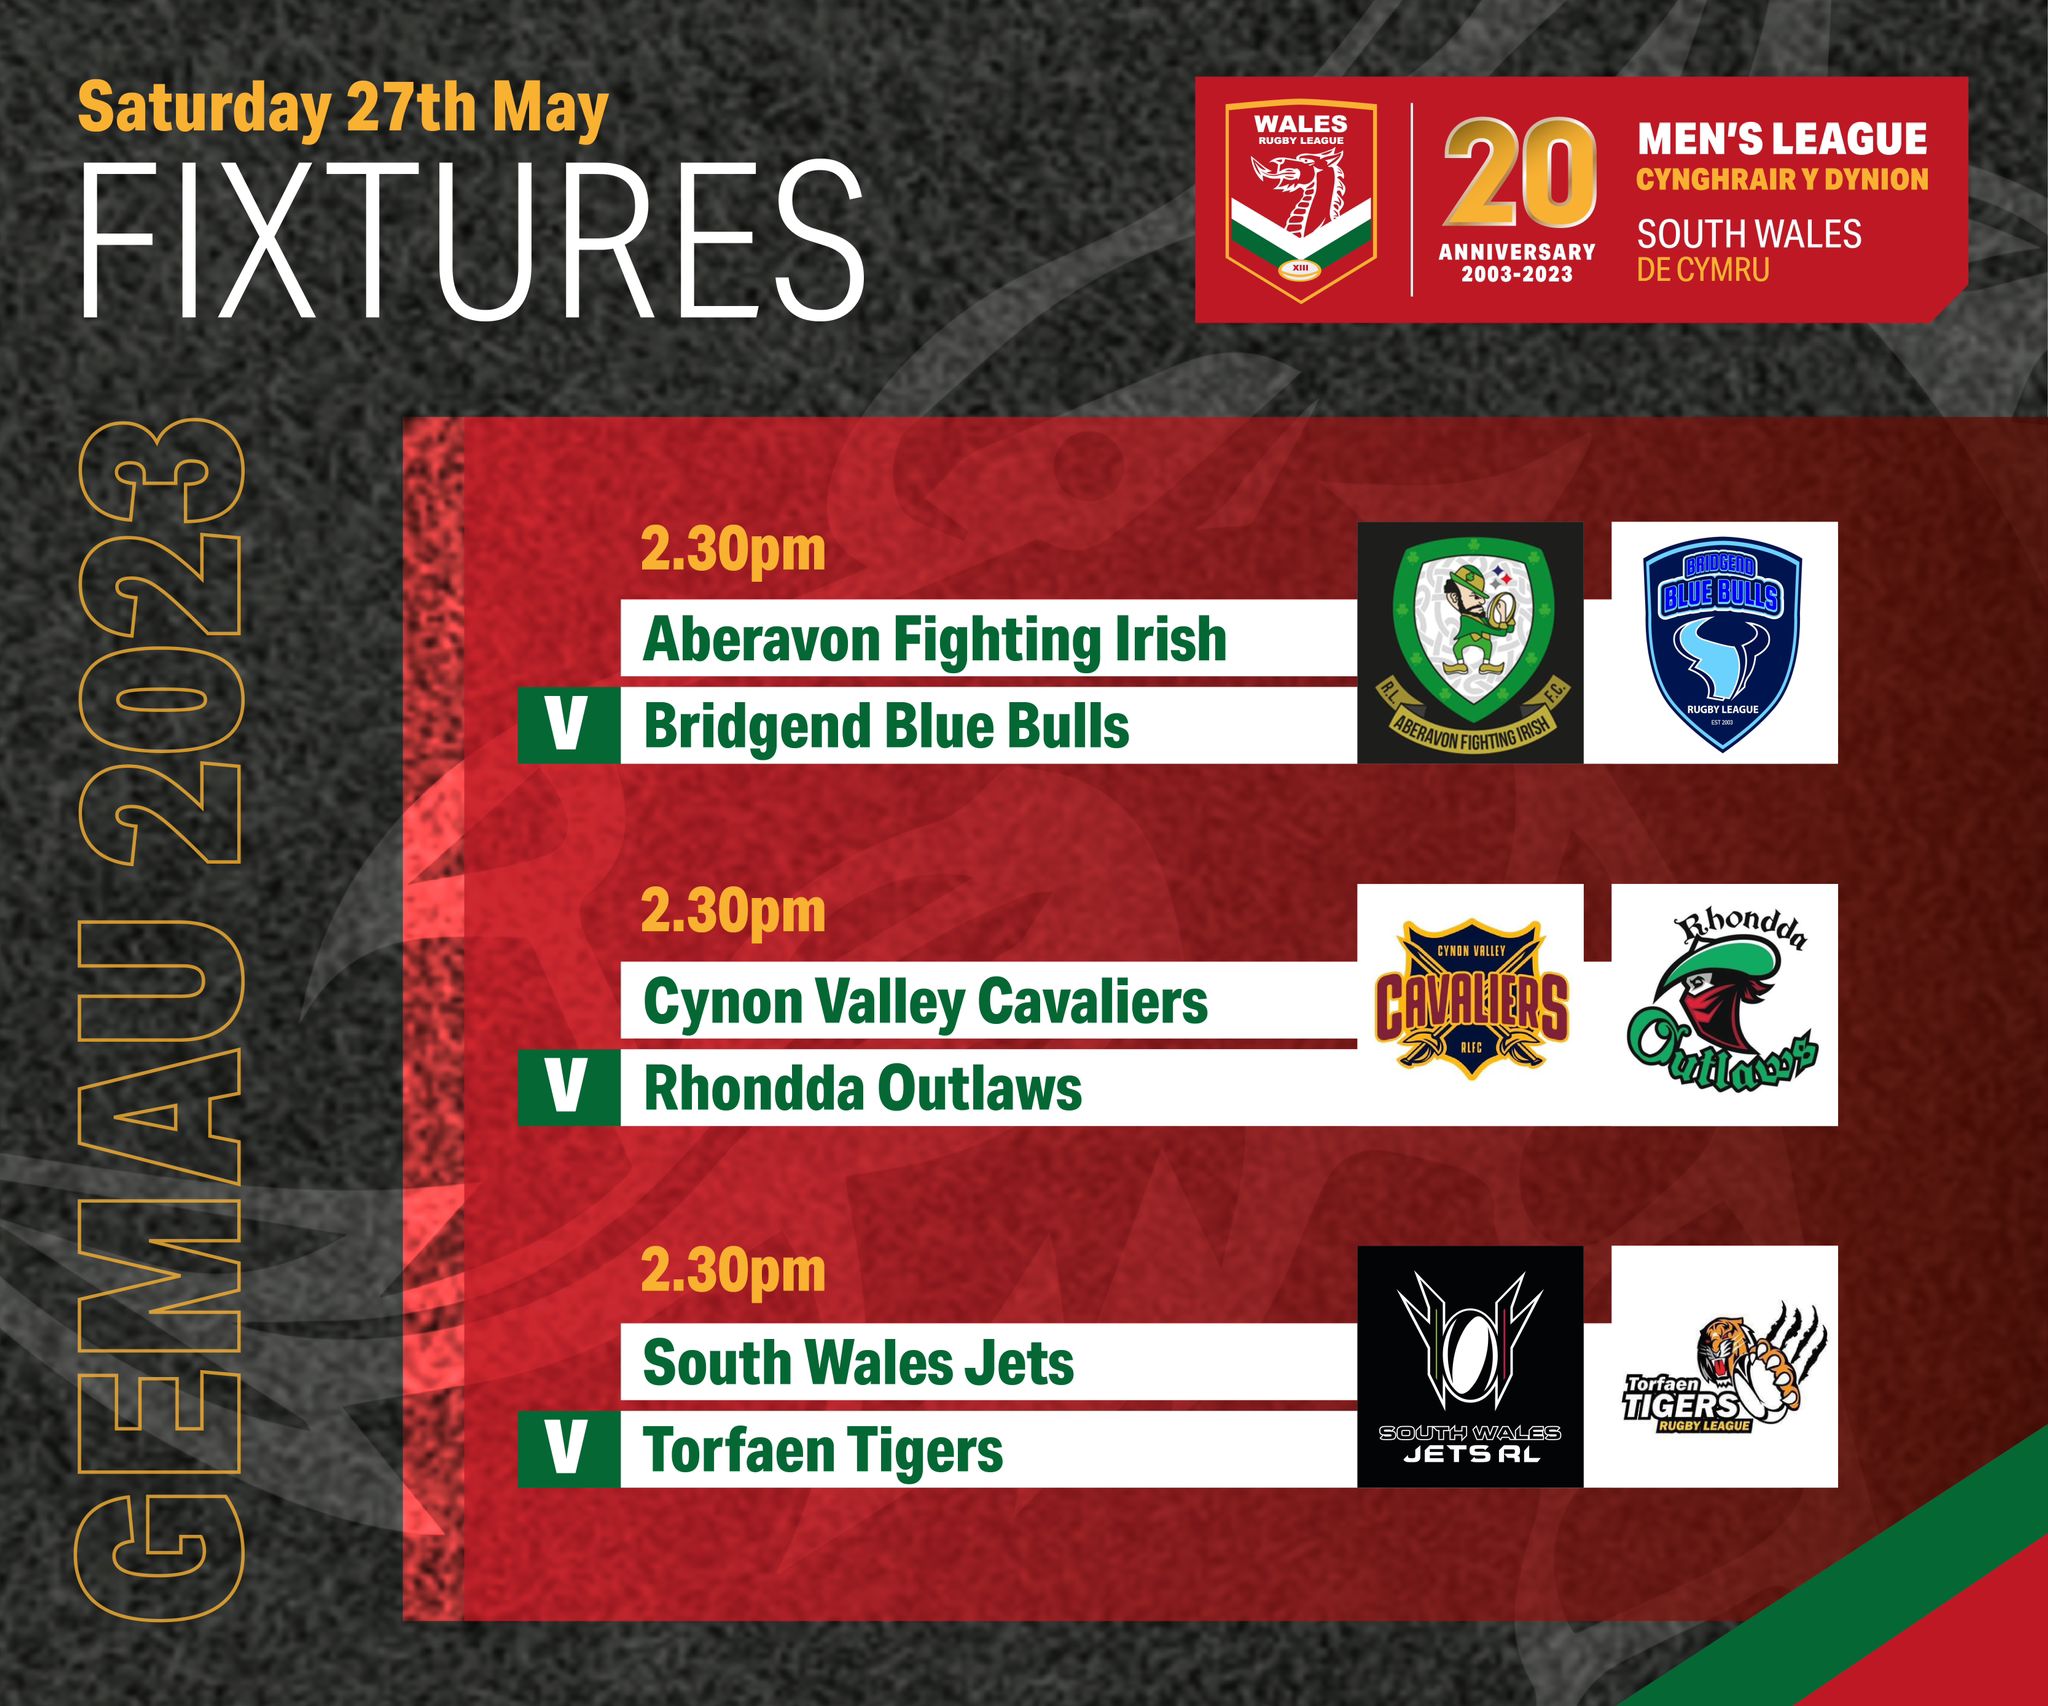 South Wales Leagues kick-off this weekend